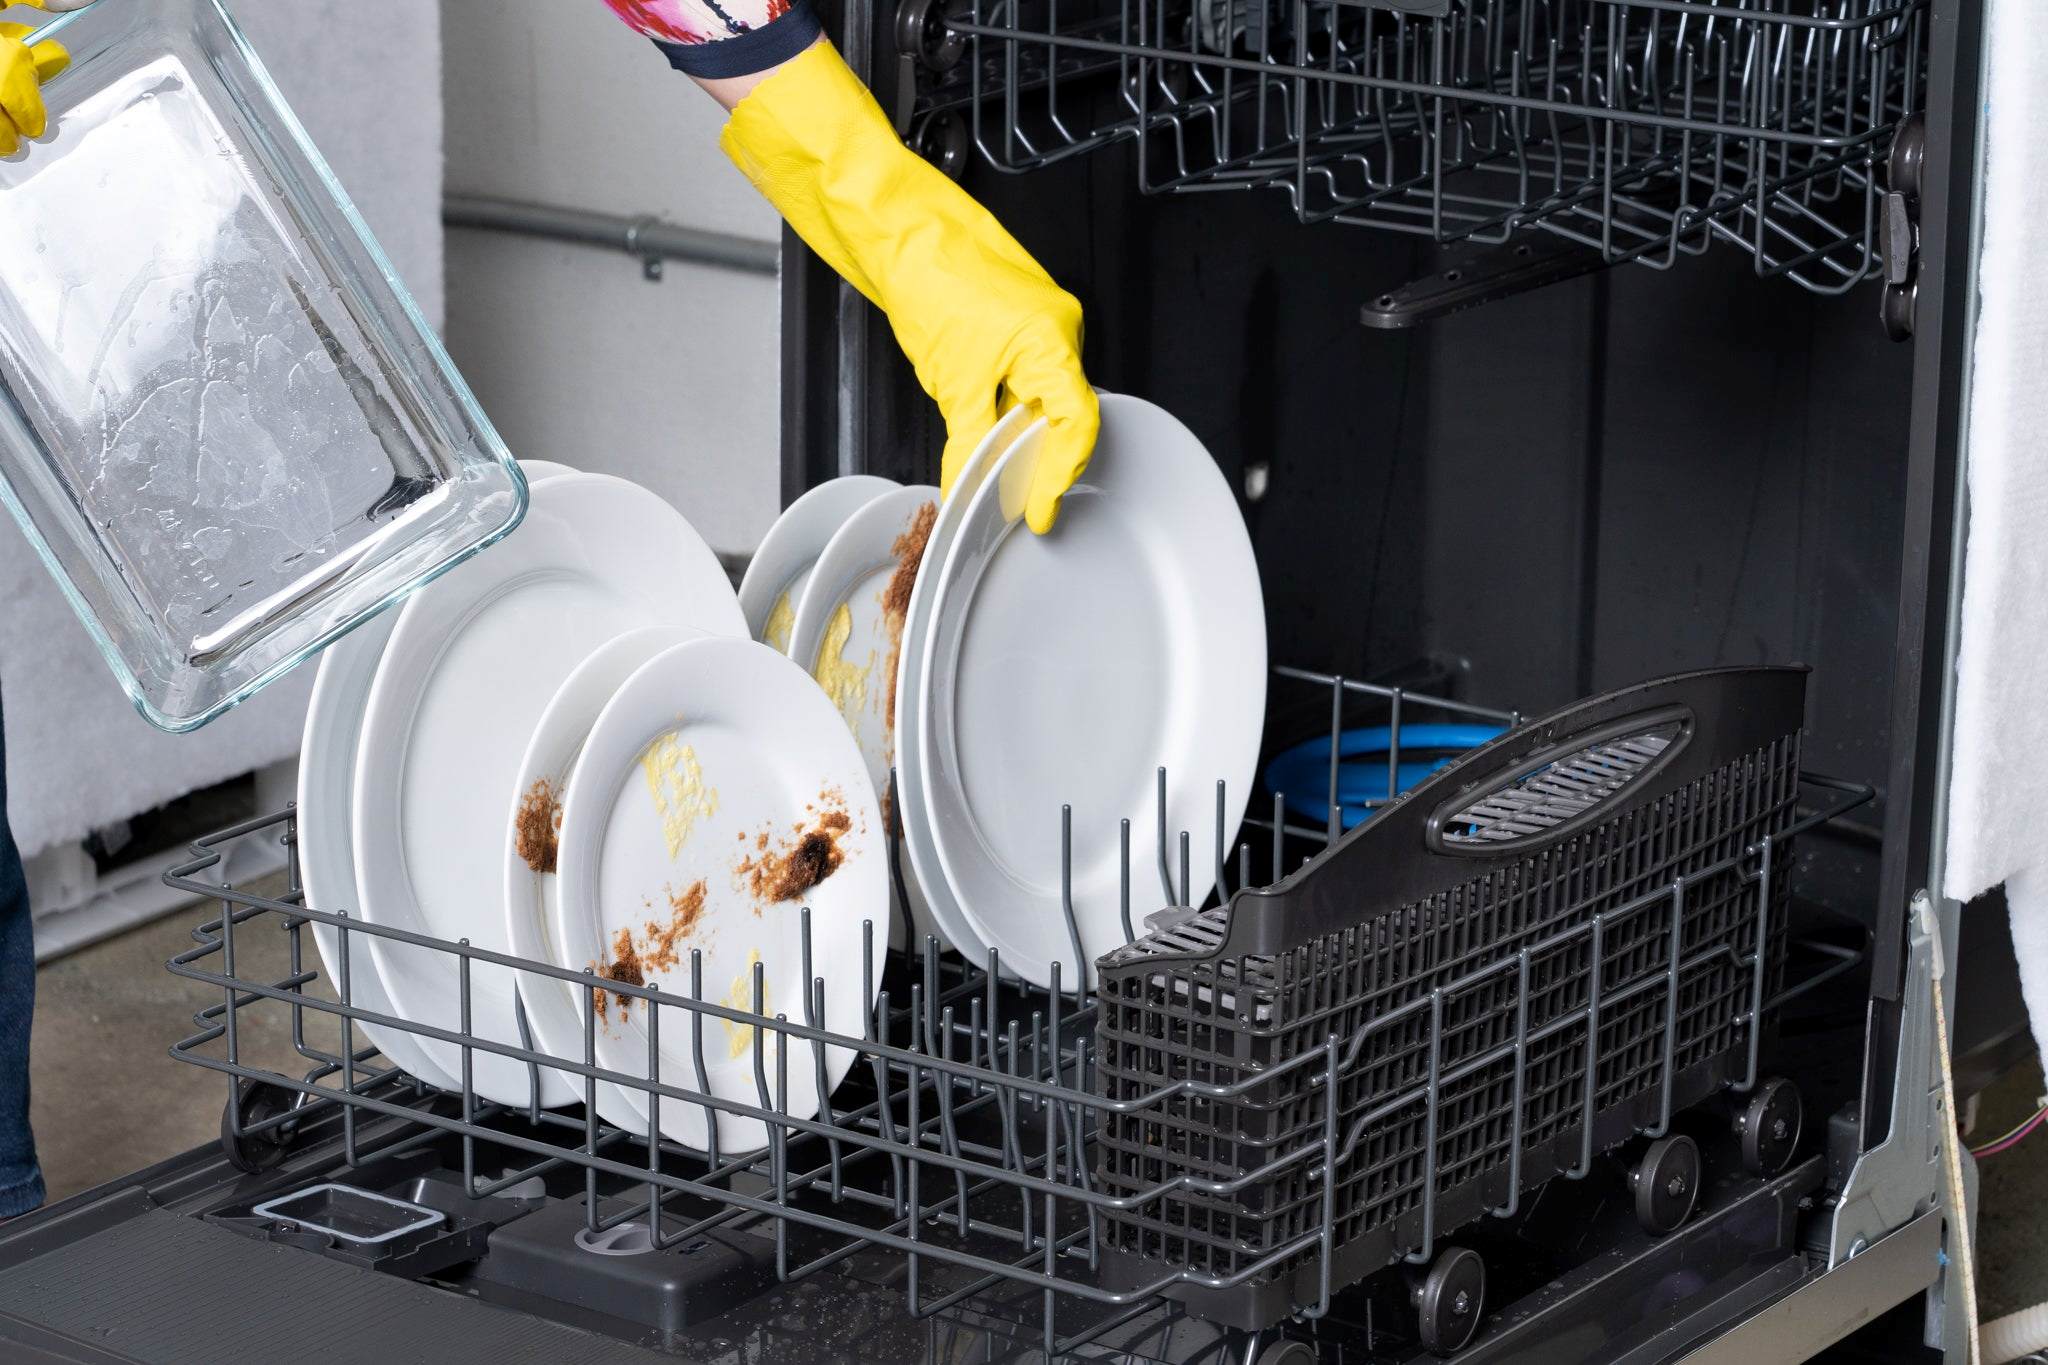 Discover The Surprising Source Of Your Dishwasher's Sneaky Water Leak